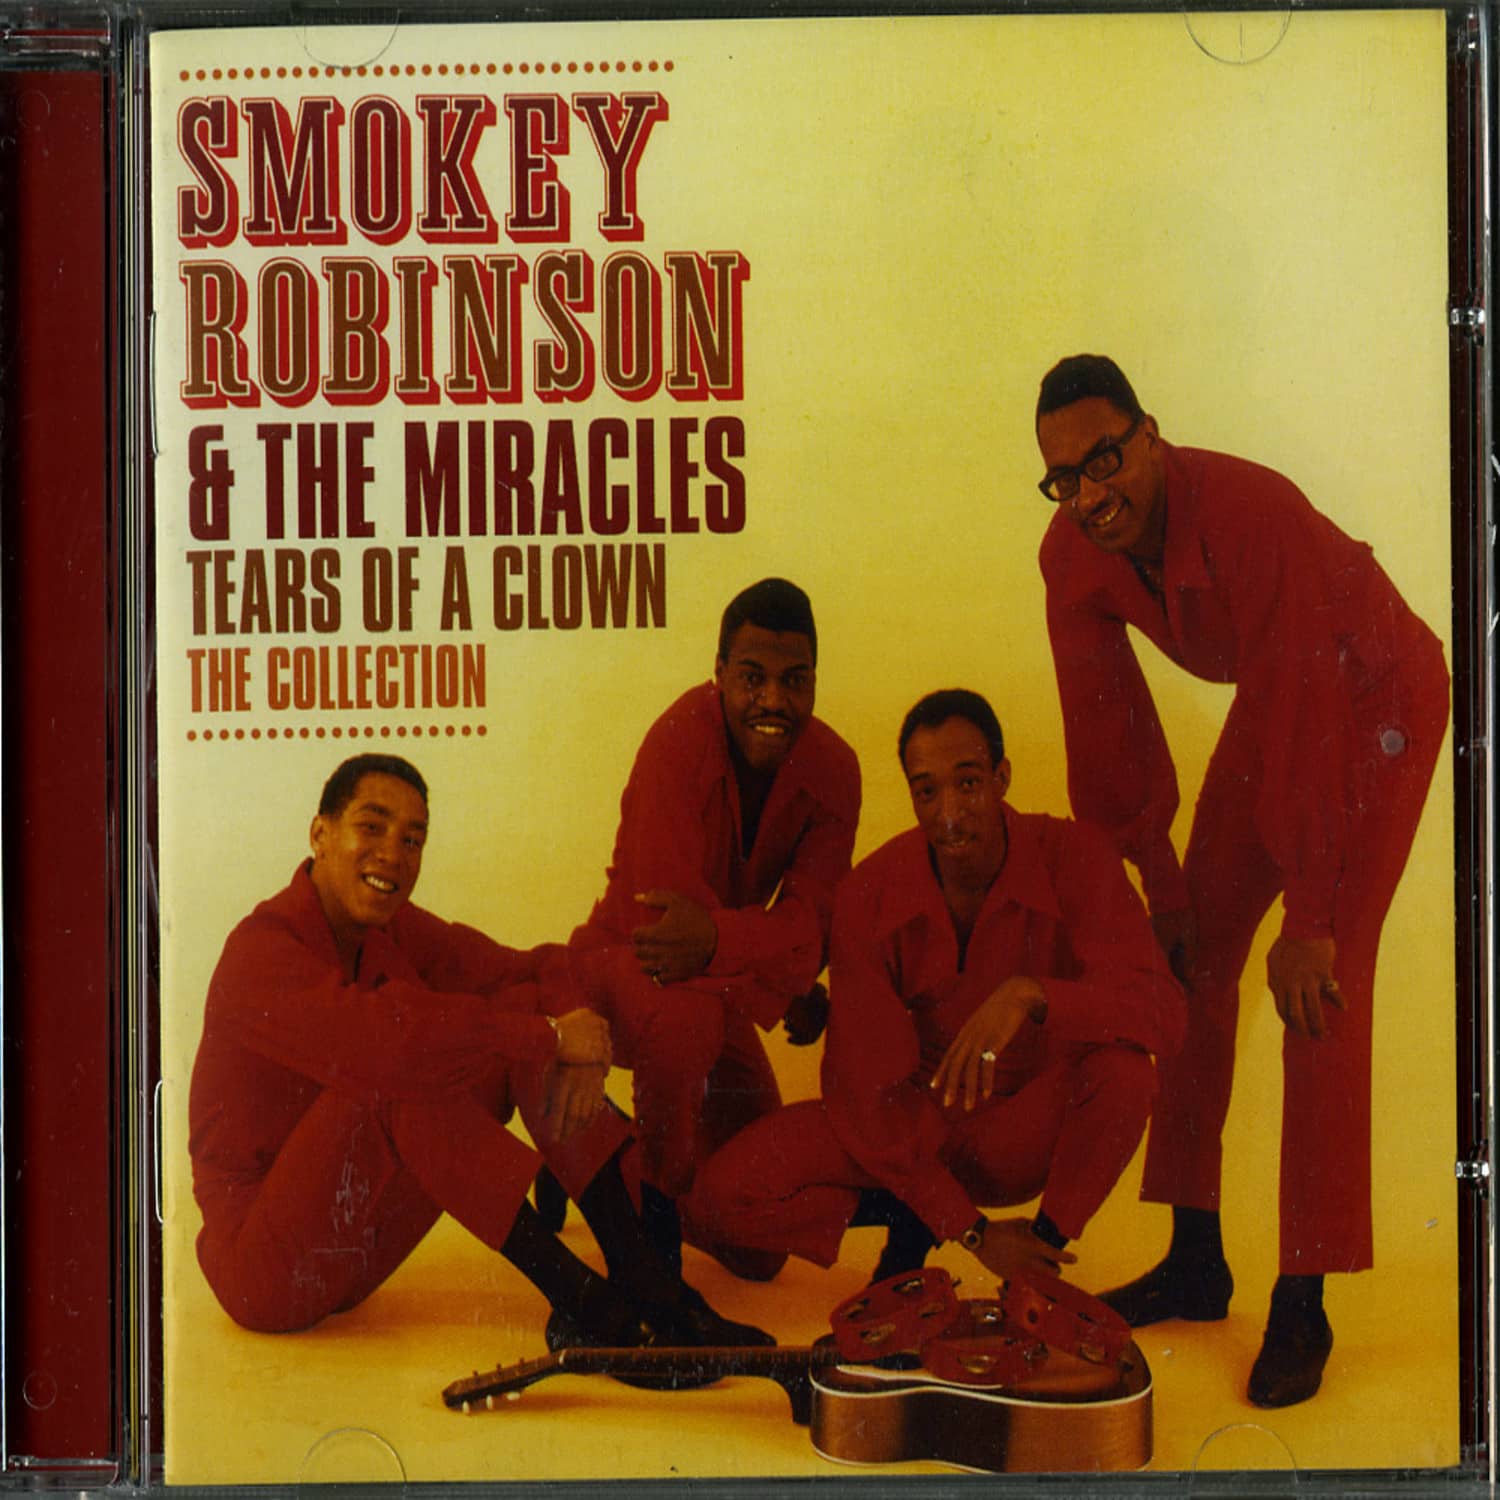 Smokey Robinson & The Miracles - TEARS OF A CLOWN - THE COLLECTION 